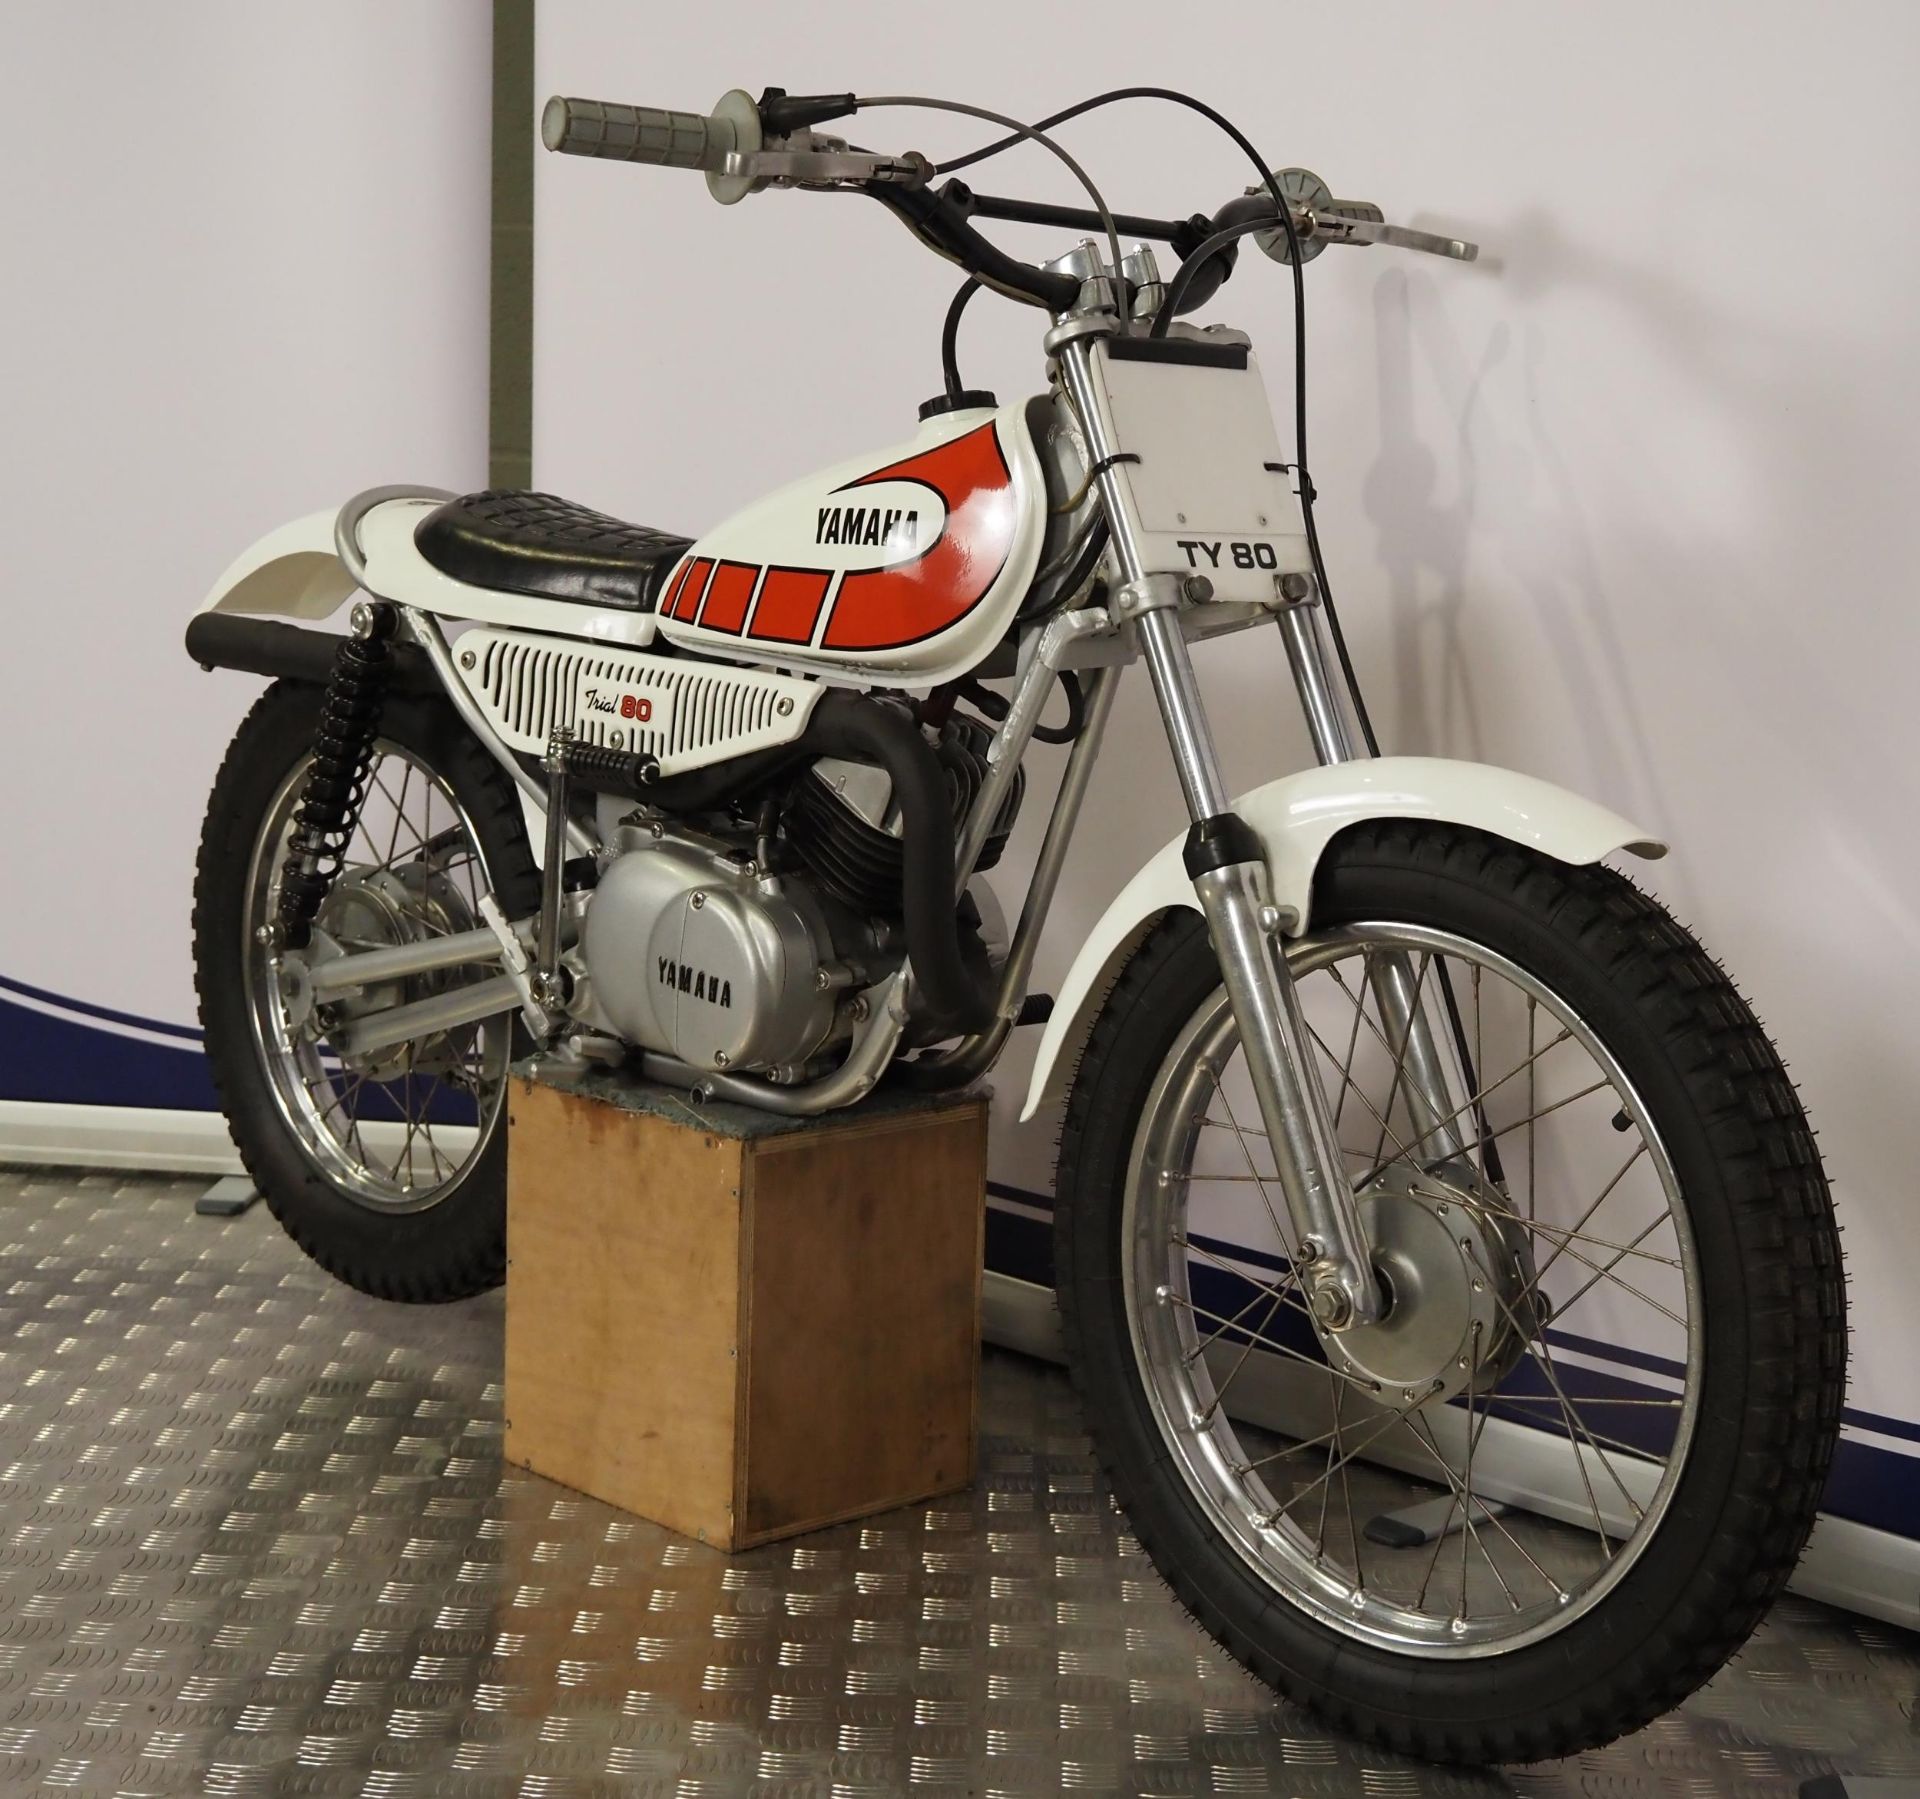 Yamaha TY 80 trials bike. Frame No. 451-110027 Engine No. 451-110027 Runs and rides but will need - Image 3 of 7